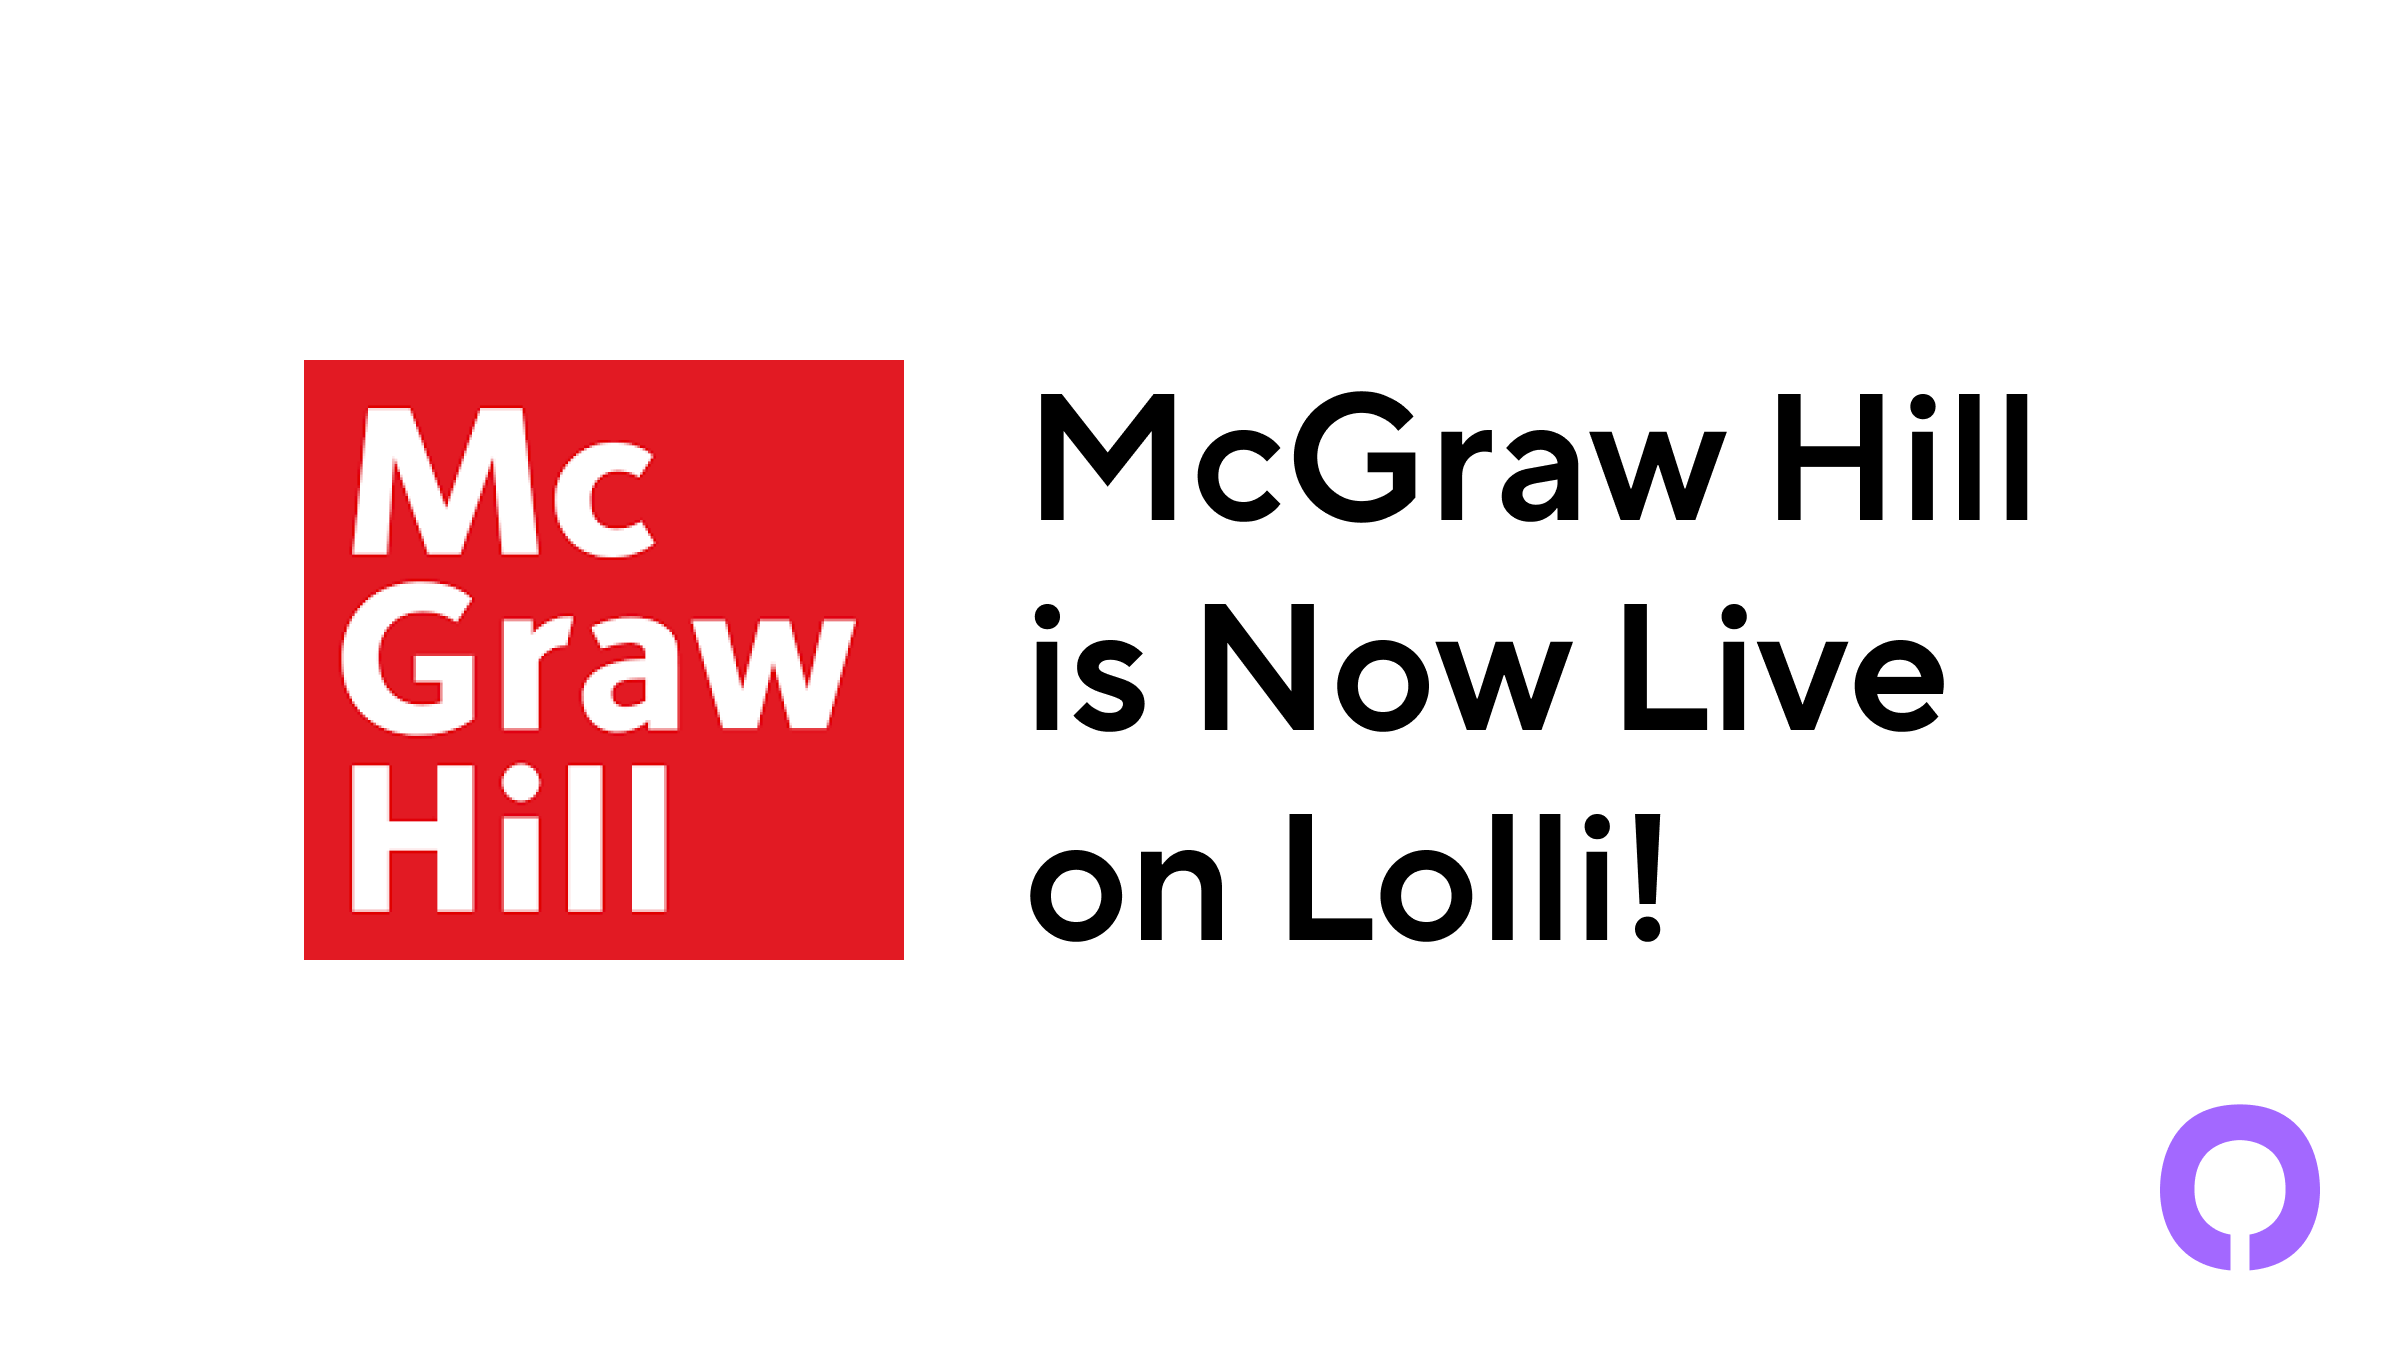 McGraw Hill is Now Live on Lolli! 📘